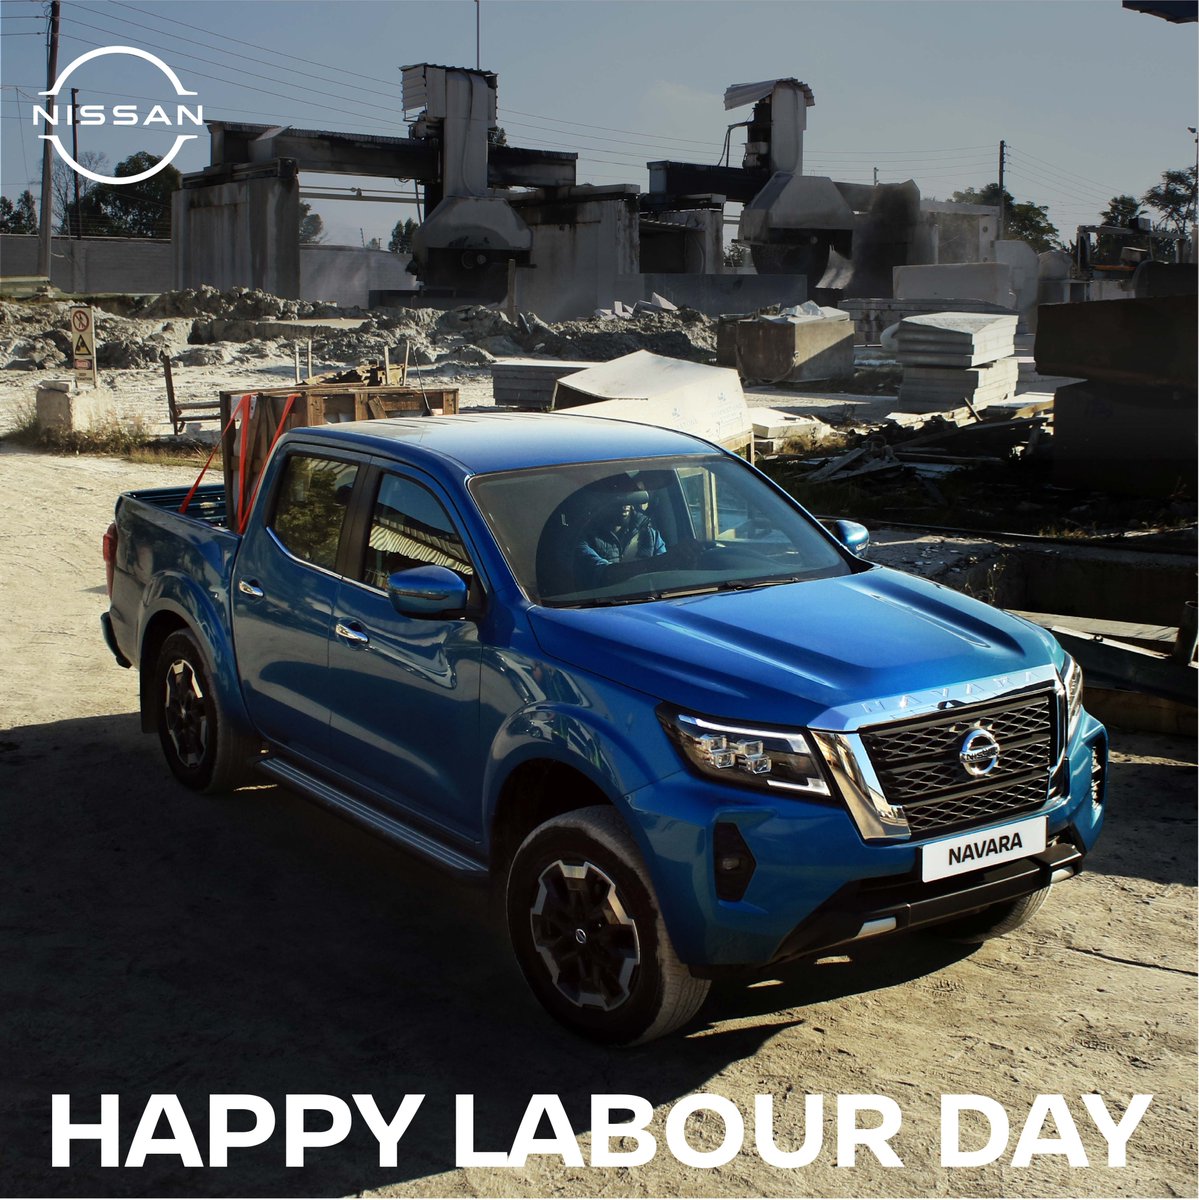 Happy Labour Day from the Crown Motors Group team